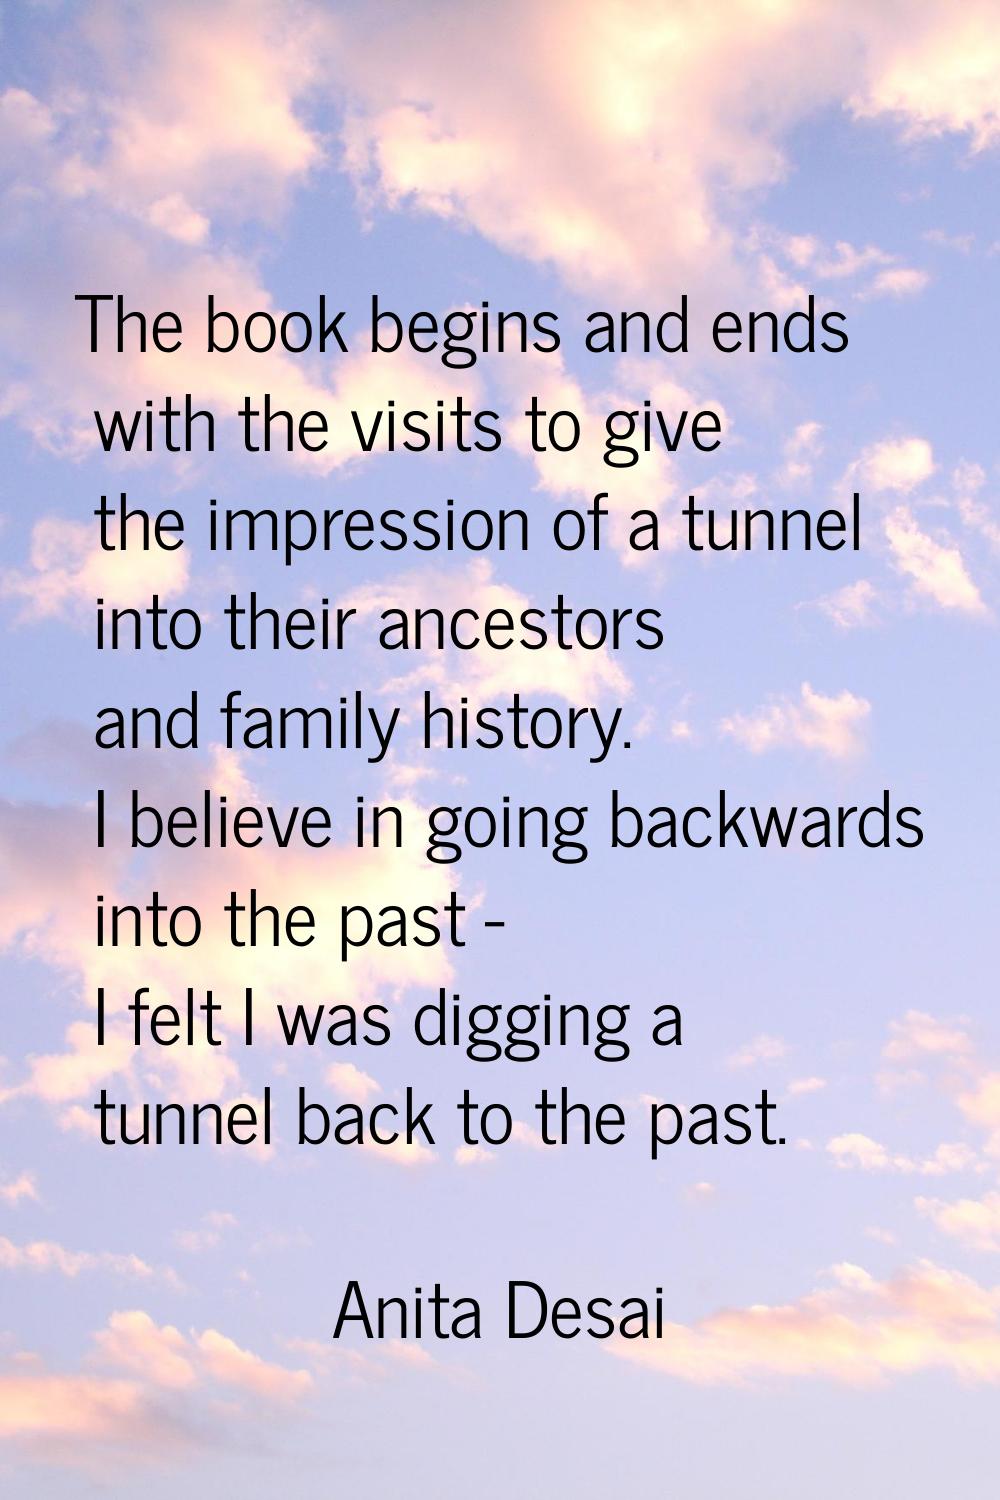 The book begins and ends with the visits to give the impression of a tunnel into their ancestors an